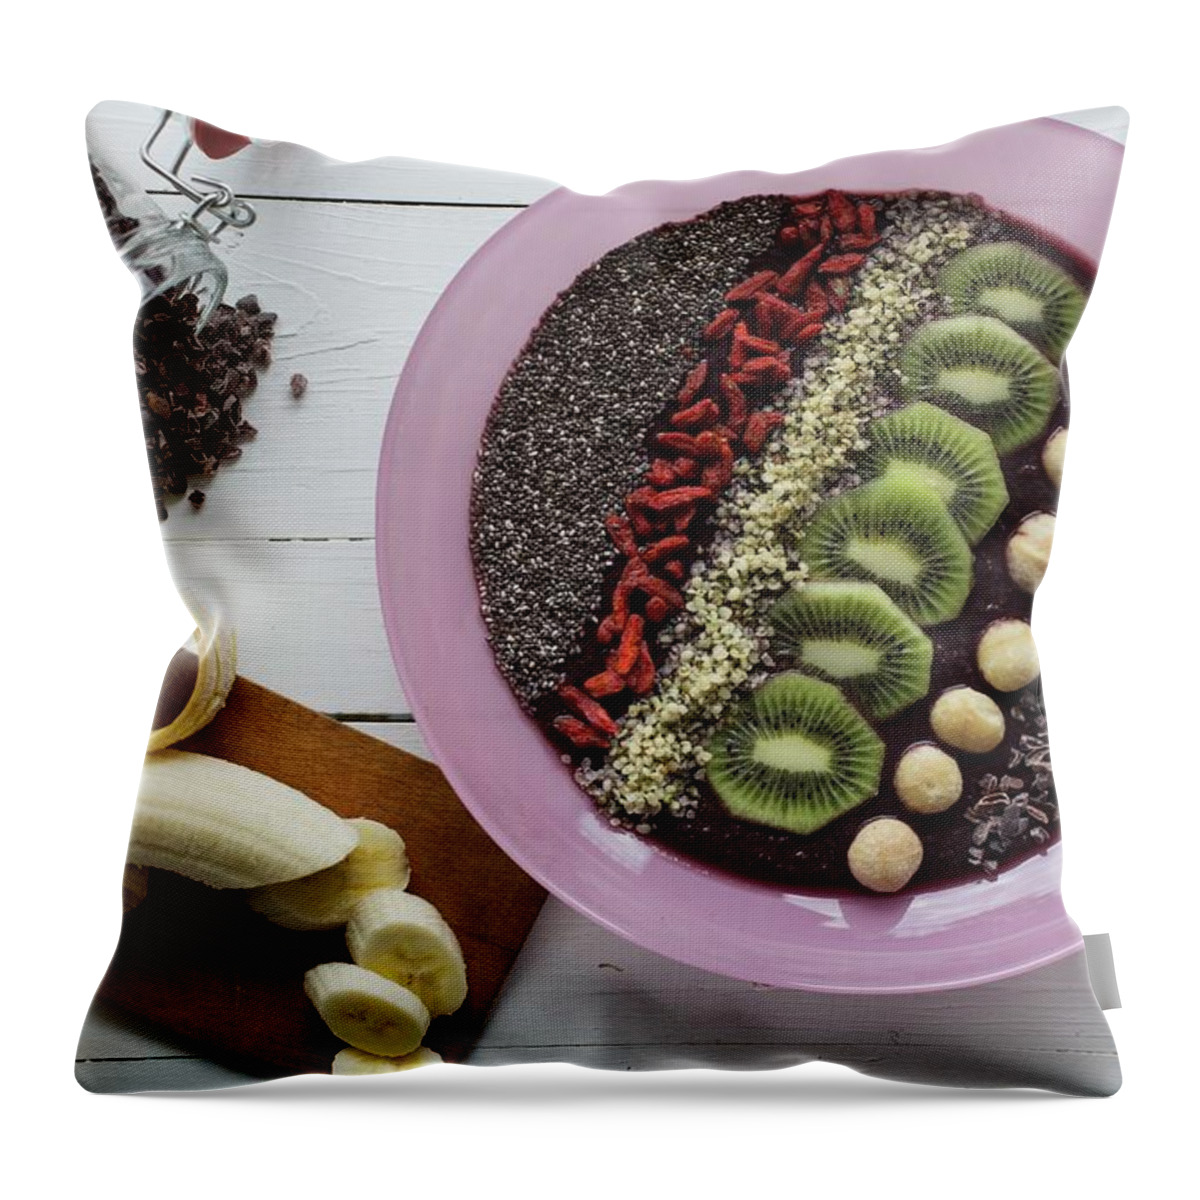 Ip_11435665 Throw Pillow featuring the photograph A Smoothie Bowl With Acai Berries And Super Foods seen From Above by Nicole Godt